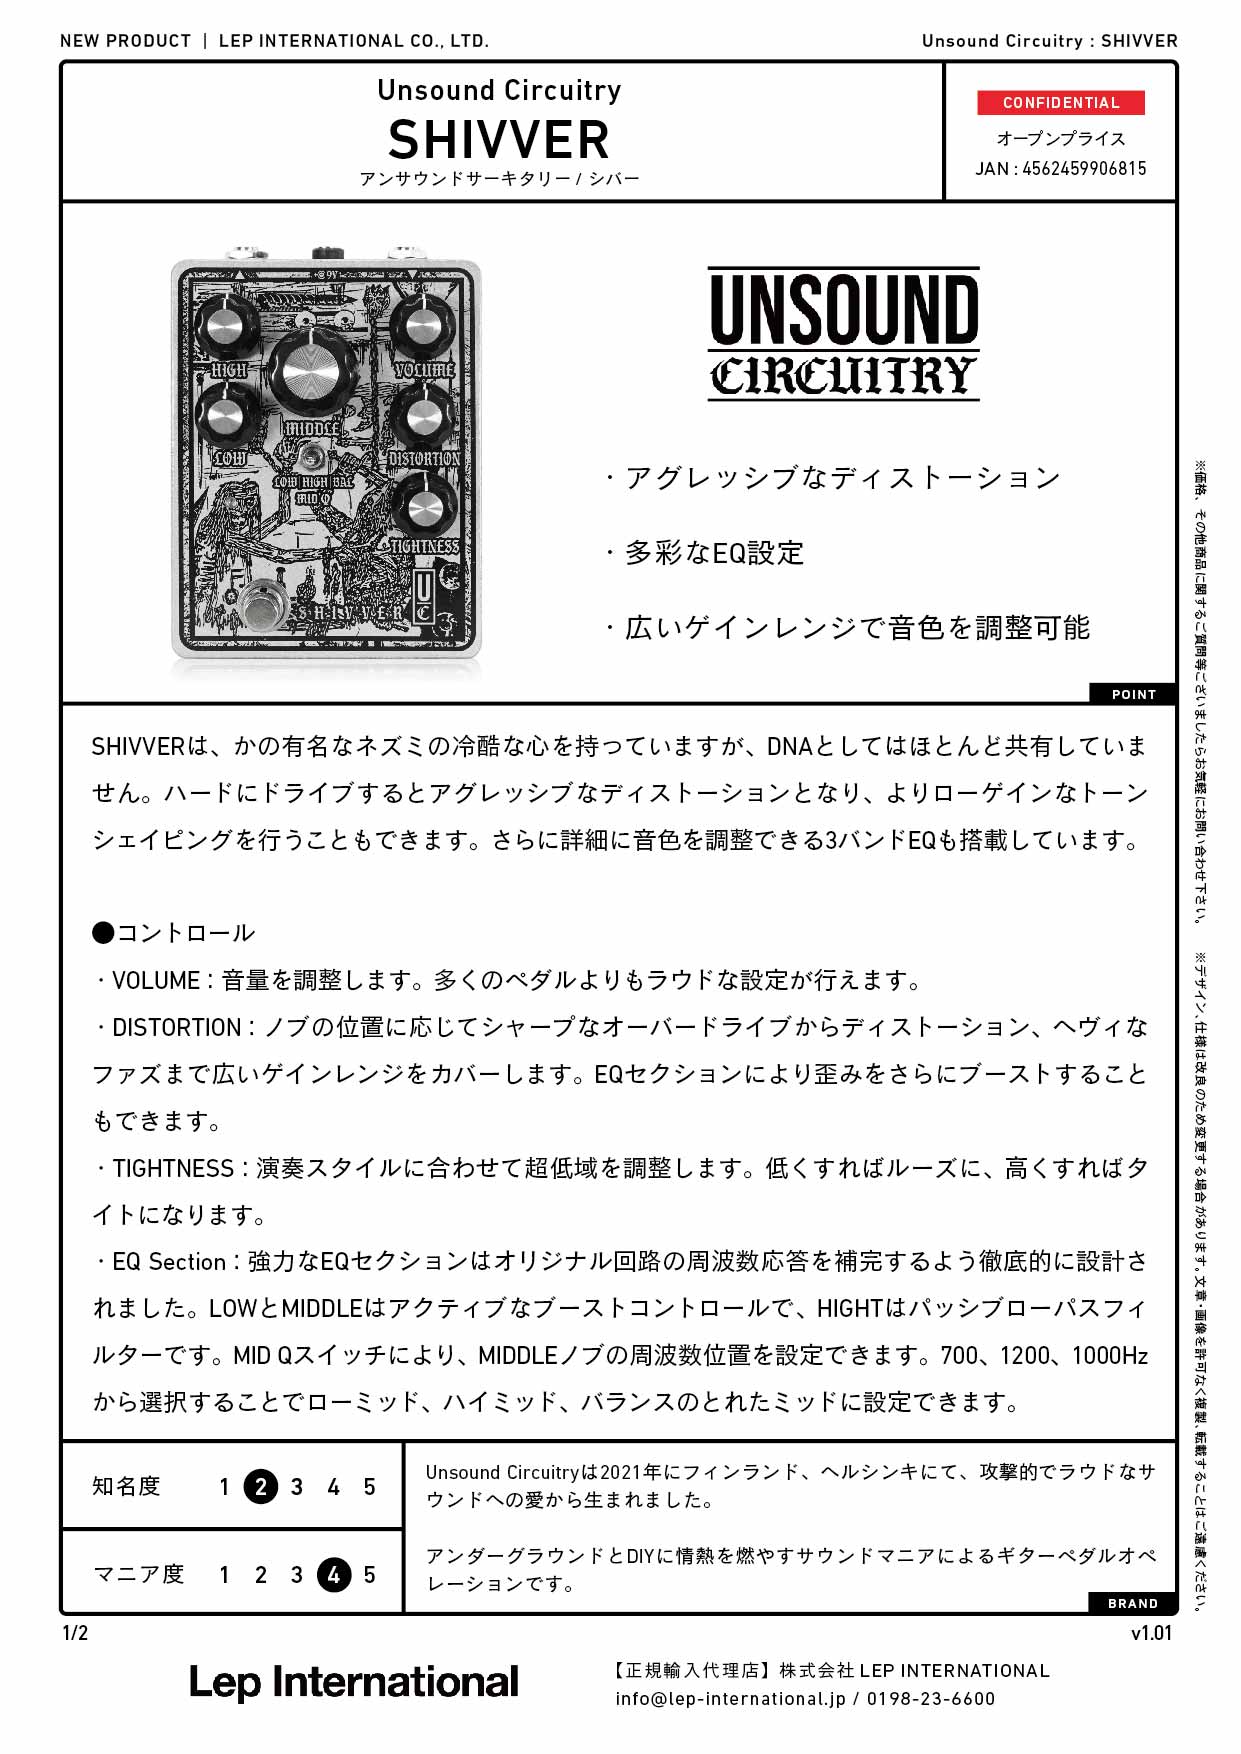 Unsound Circuitry / SHIVVER